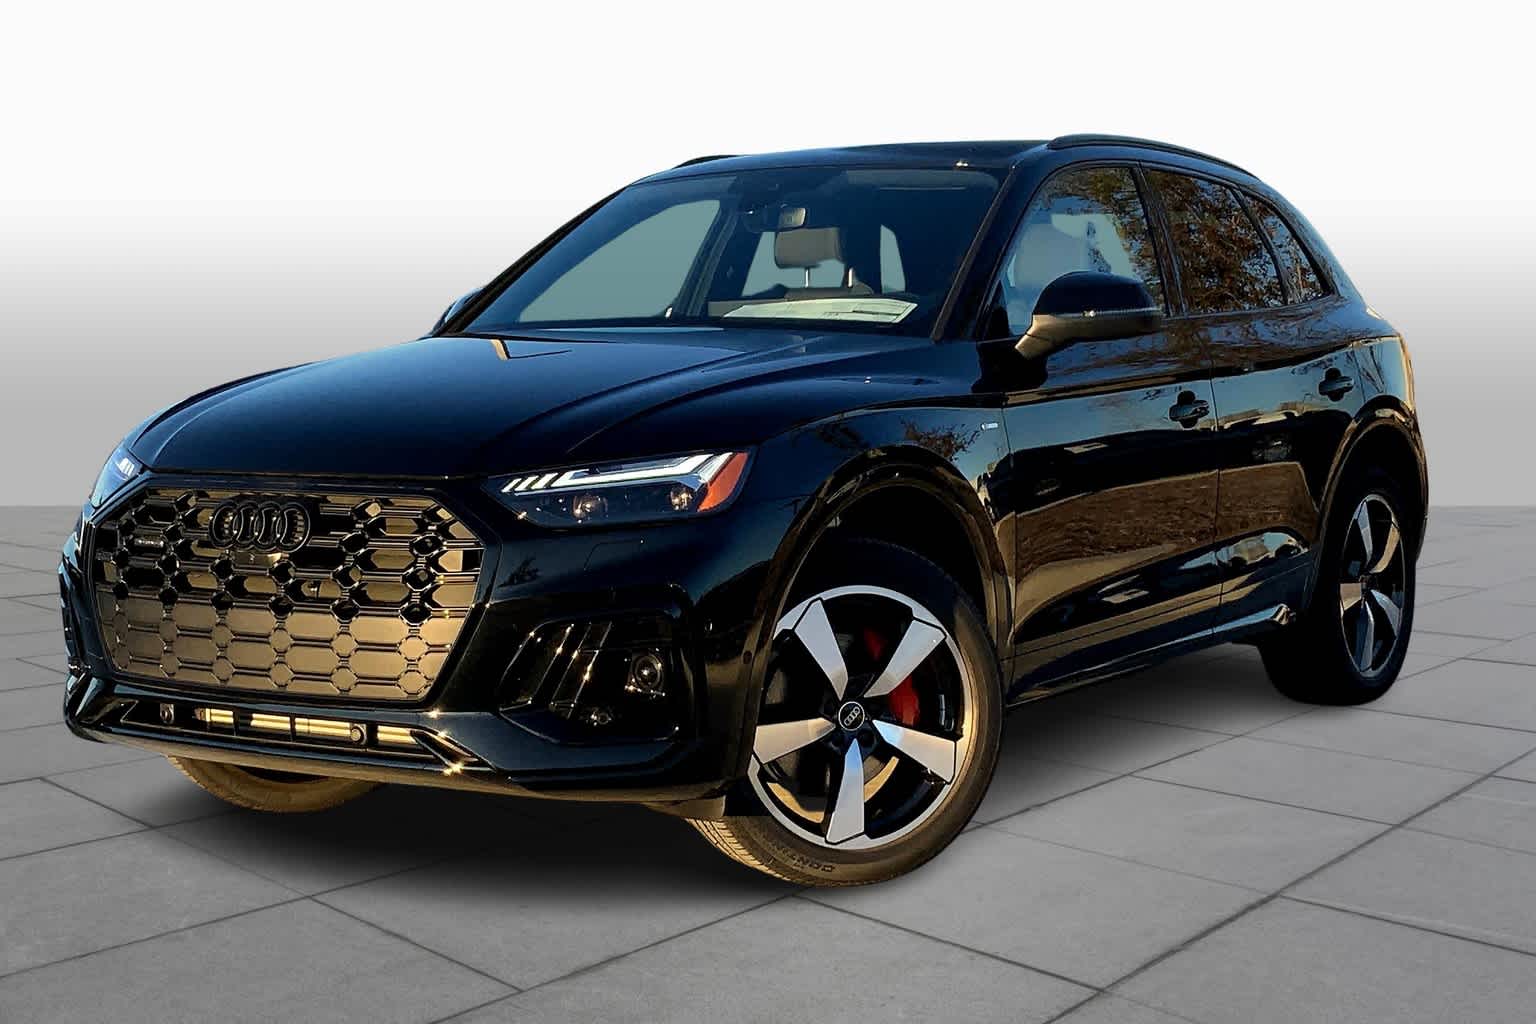 What Does the Audi S Line Package Do for the Q5?